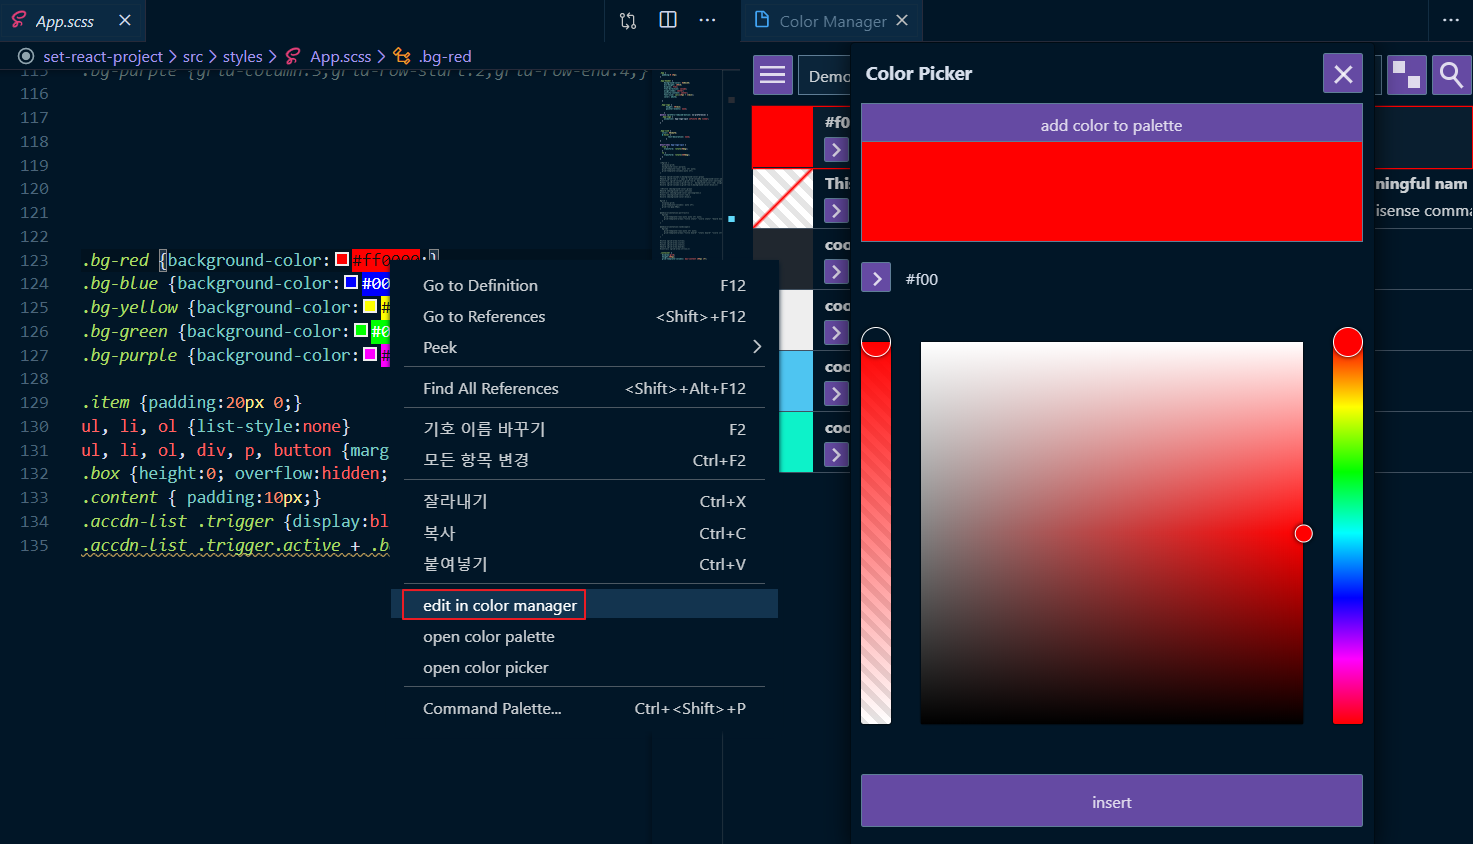 color_manager 사용예시